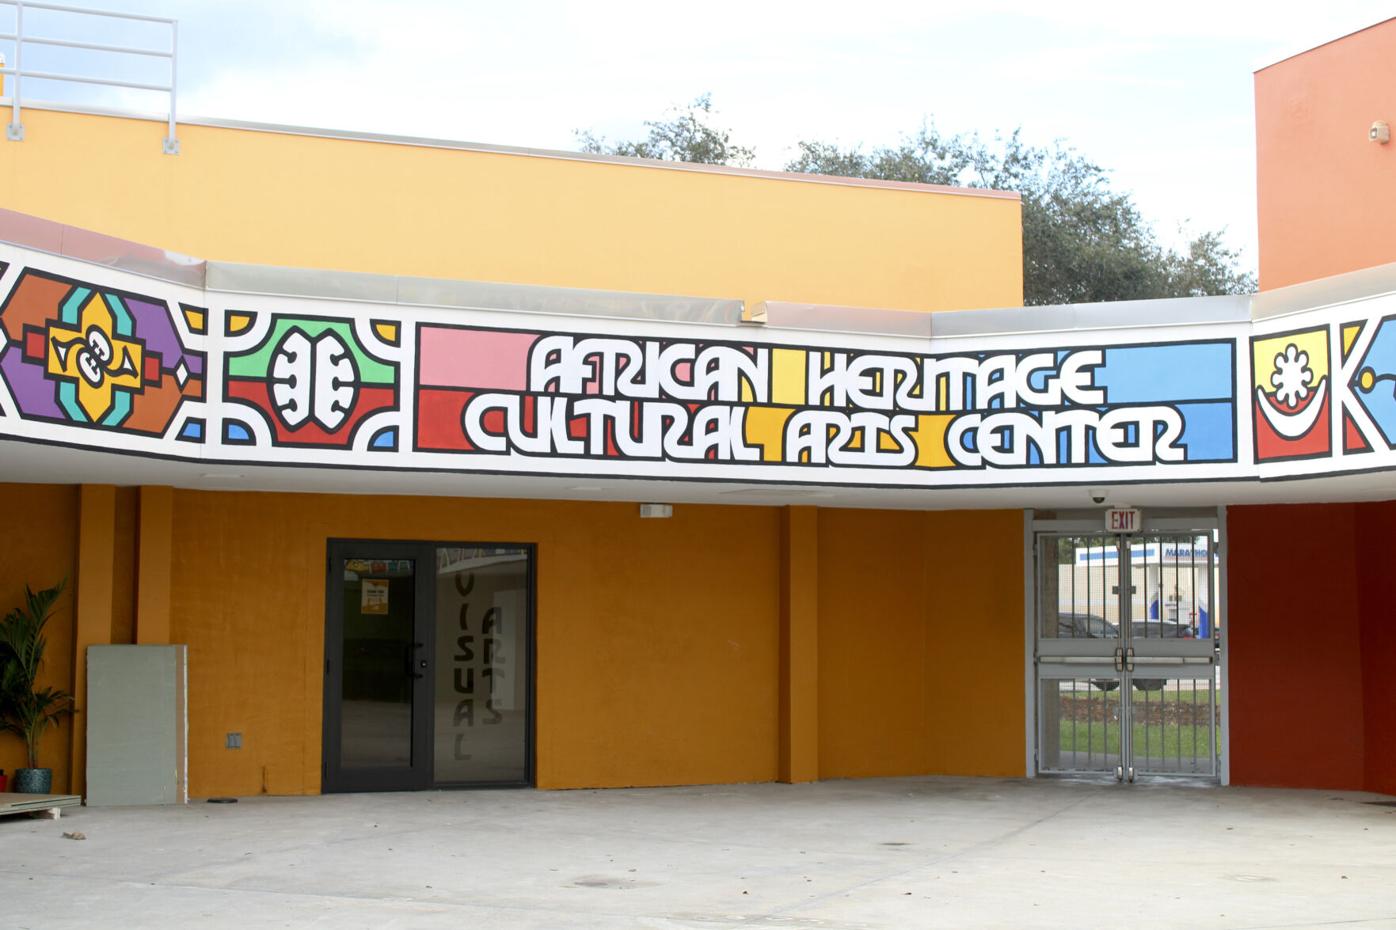 The African Heritage Cultural Arts Center